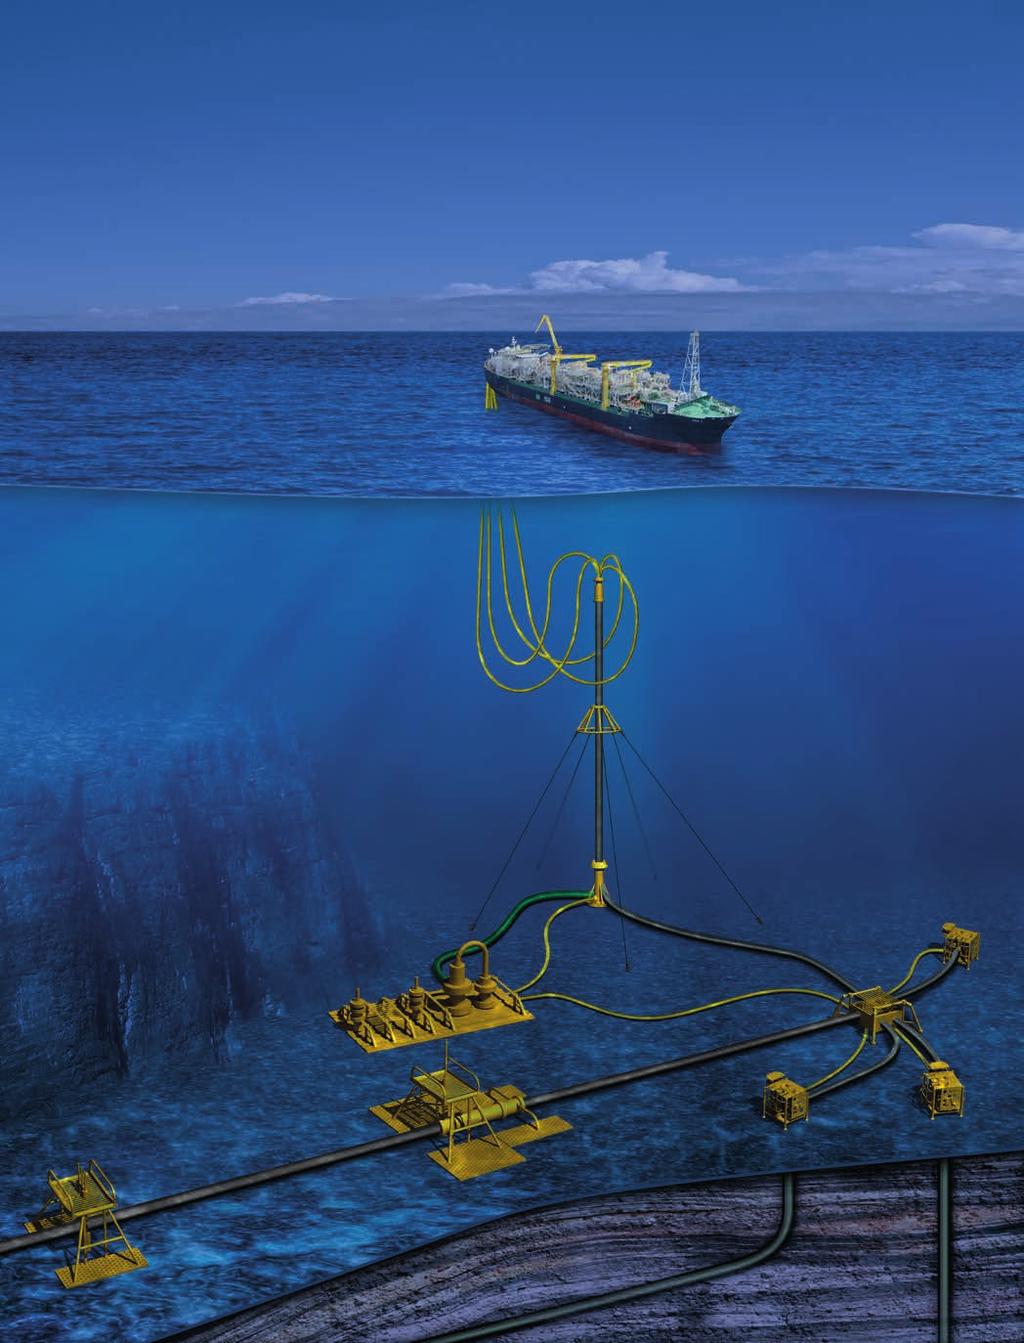 Oil & Gas SURF (Subsea Umbilicals, Risers and Flowlines) The application of distributed fibre optic sensing to flowlines and umbilicals offers clear operational and financial benefits.